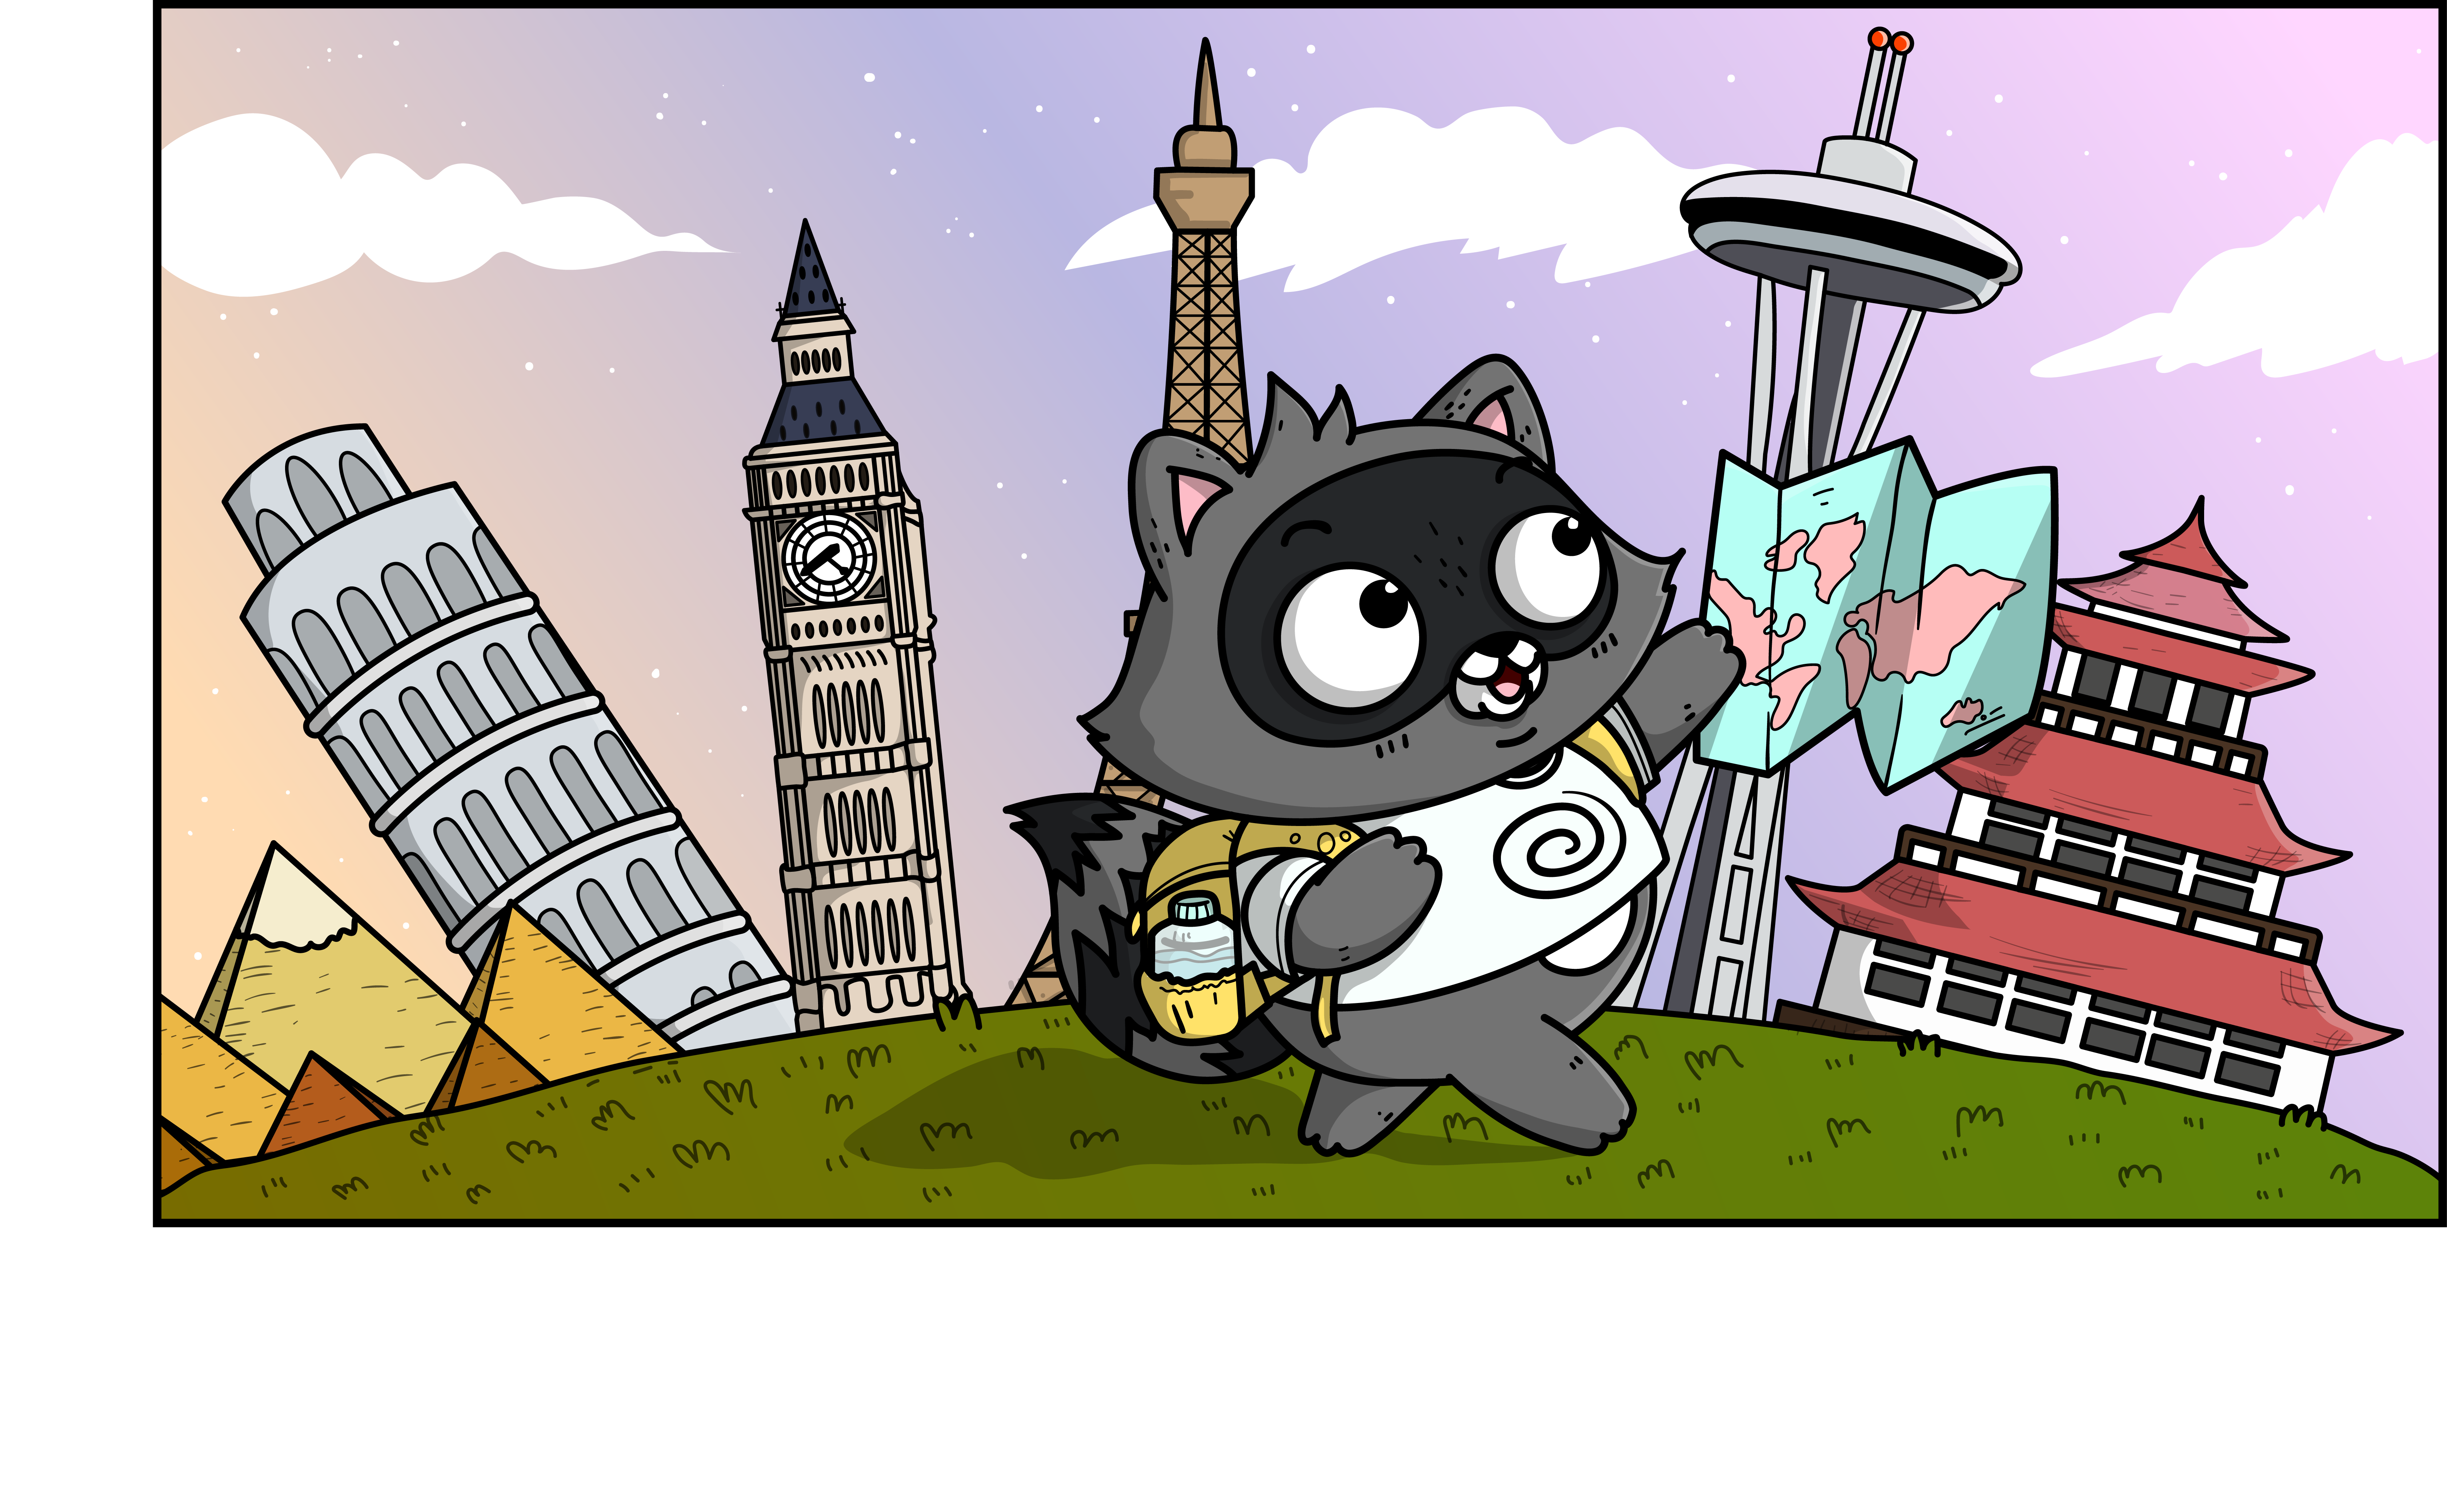 Bit (the racoon) takes a trip around the world